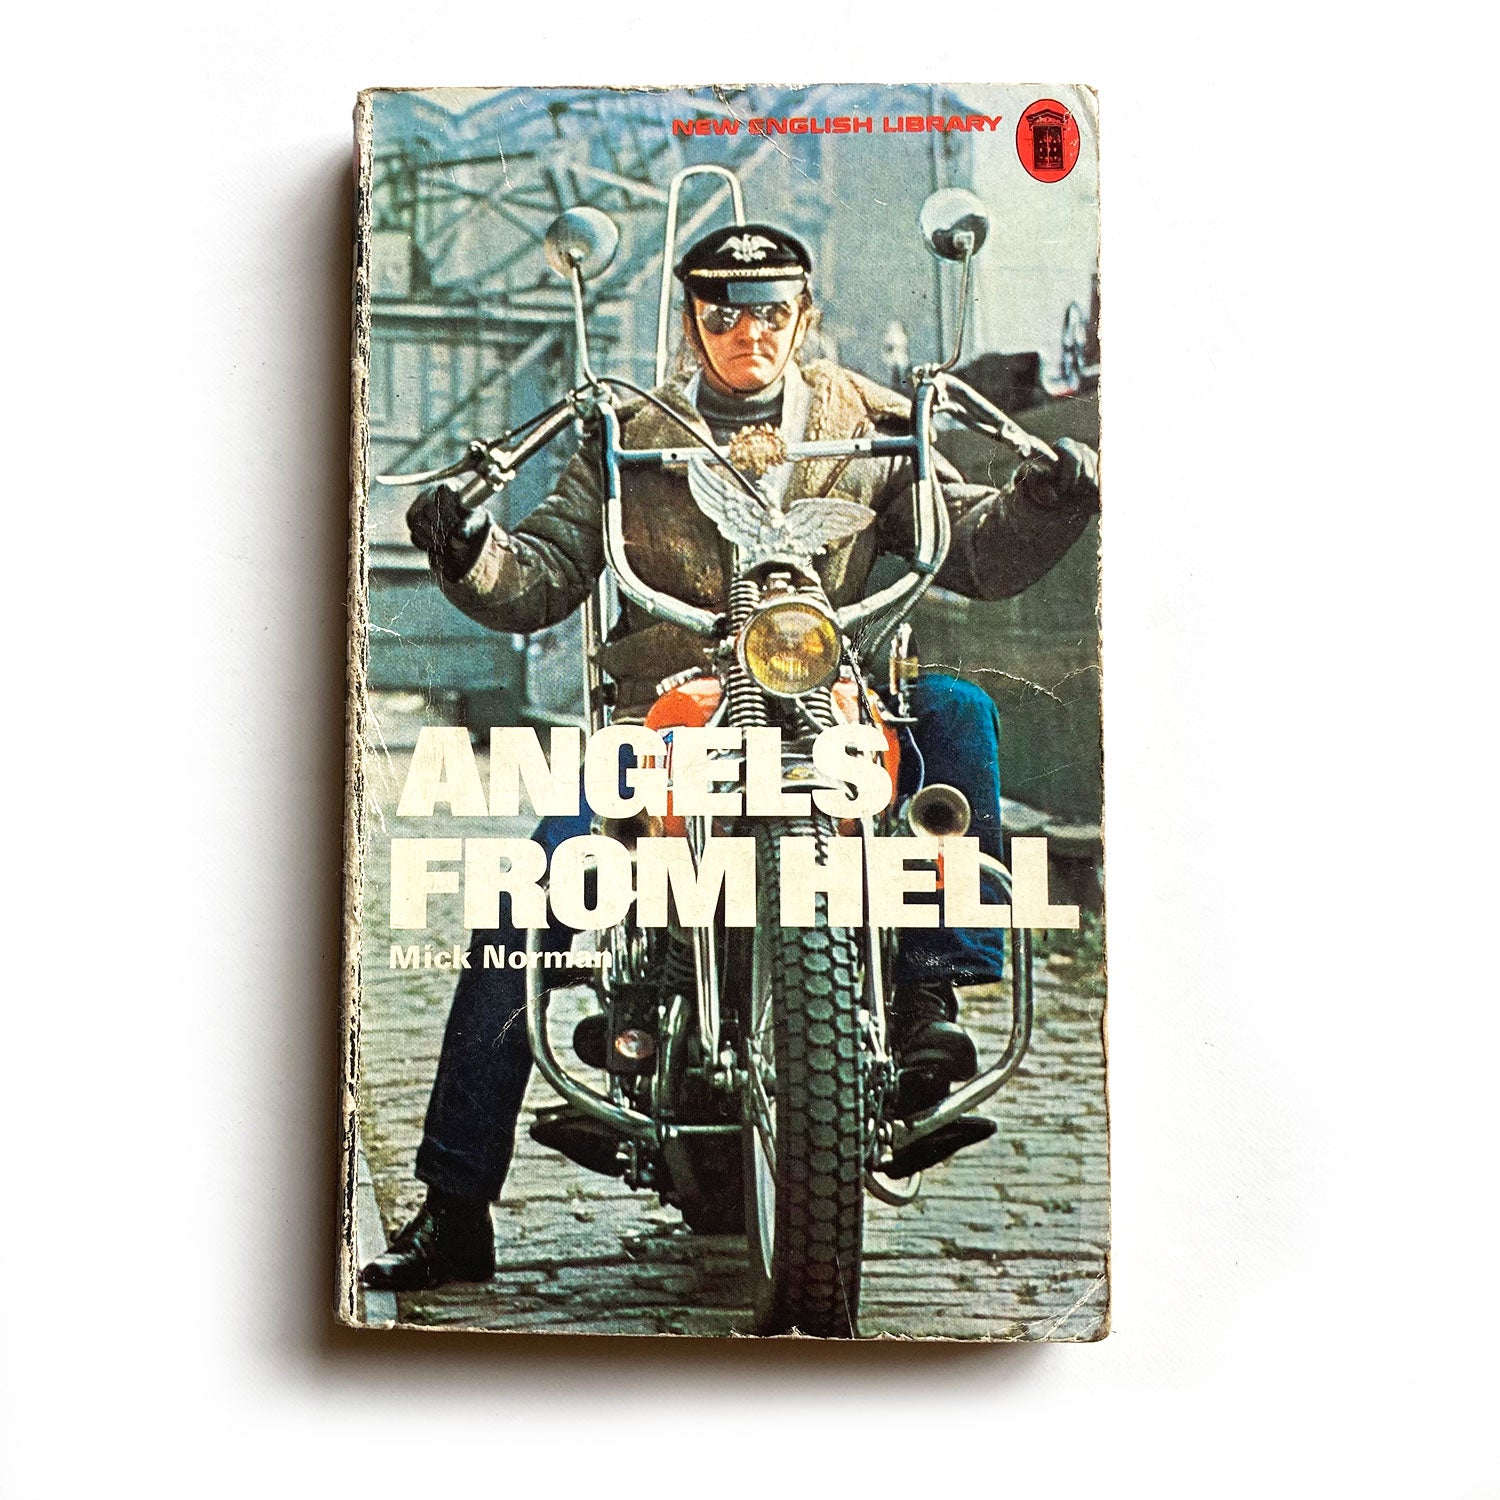 Angels From Hell by Mick Norman, New English Library paperback, 1974